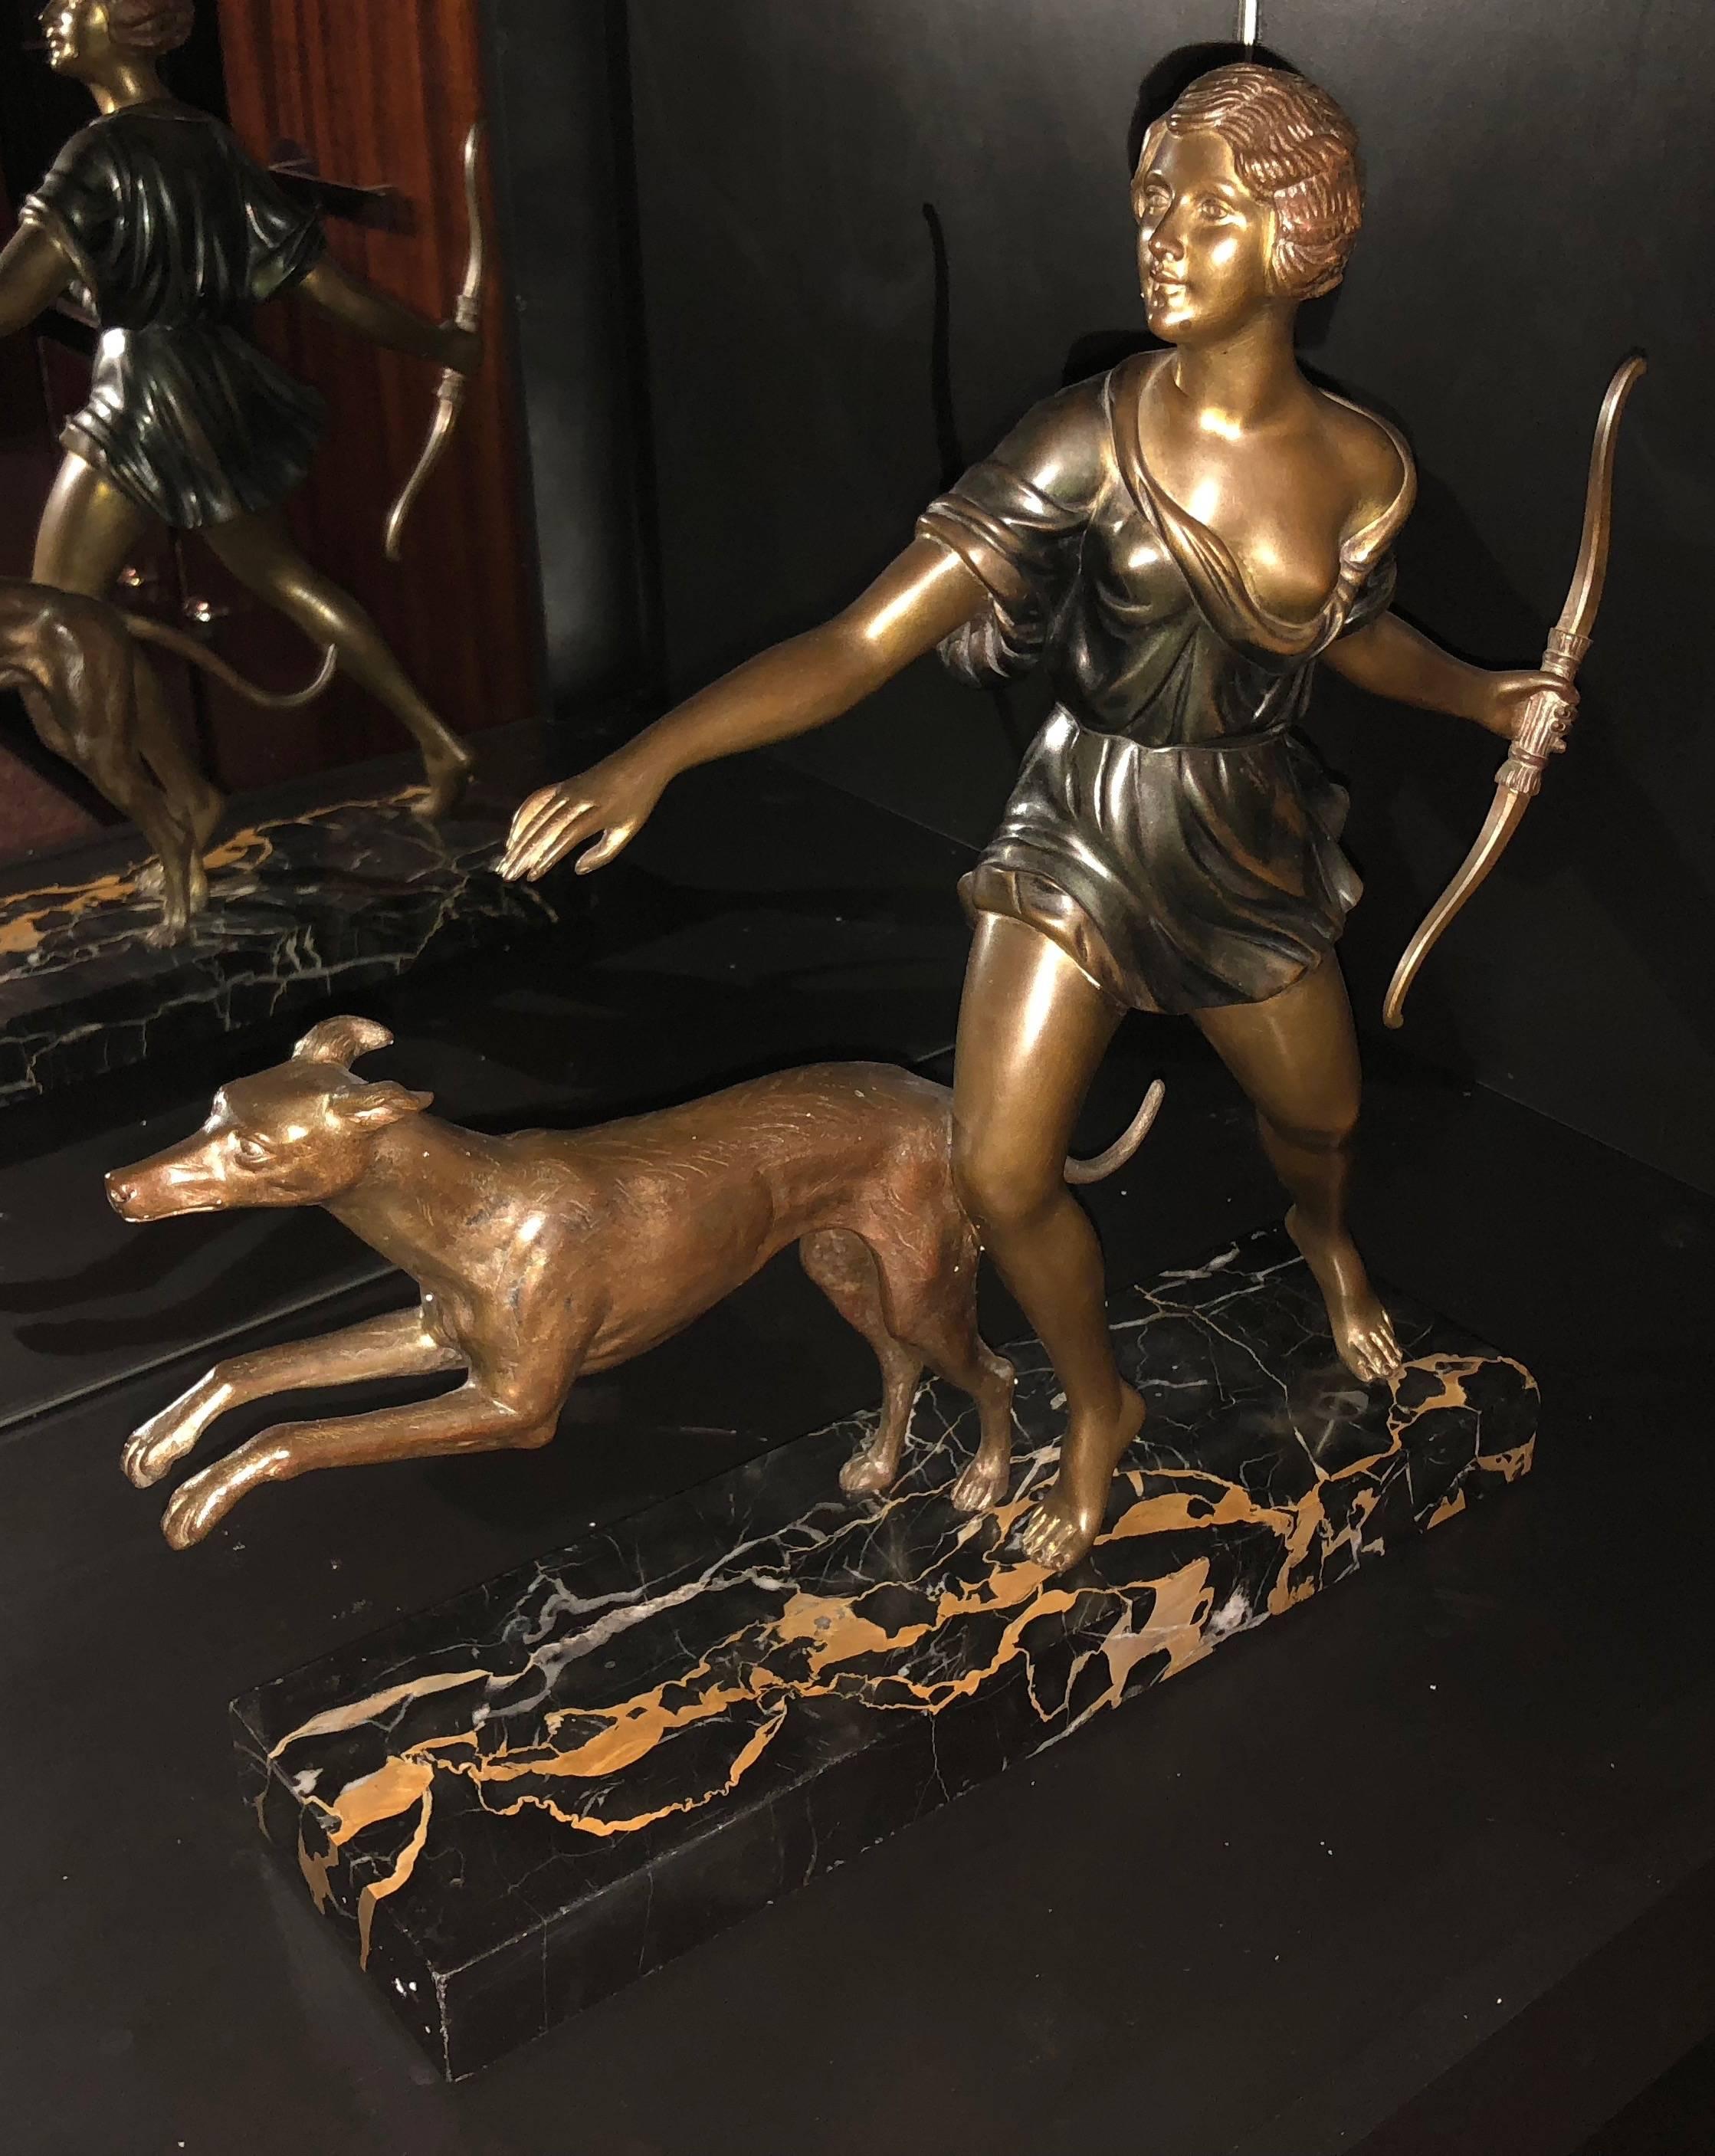 Art Deco Figure of Diana The Huntress by Inacio Gallo. This sculpture is in bronze and sits on a multicolored portoro marble base. Signed I Gallo to rear edge of marble. Classic Diana figure with subtle cold painted bronze treatment giving the